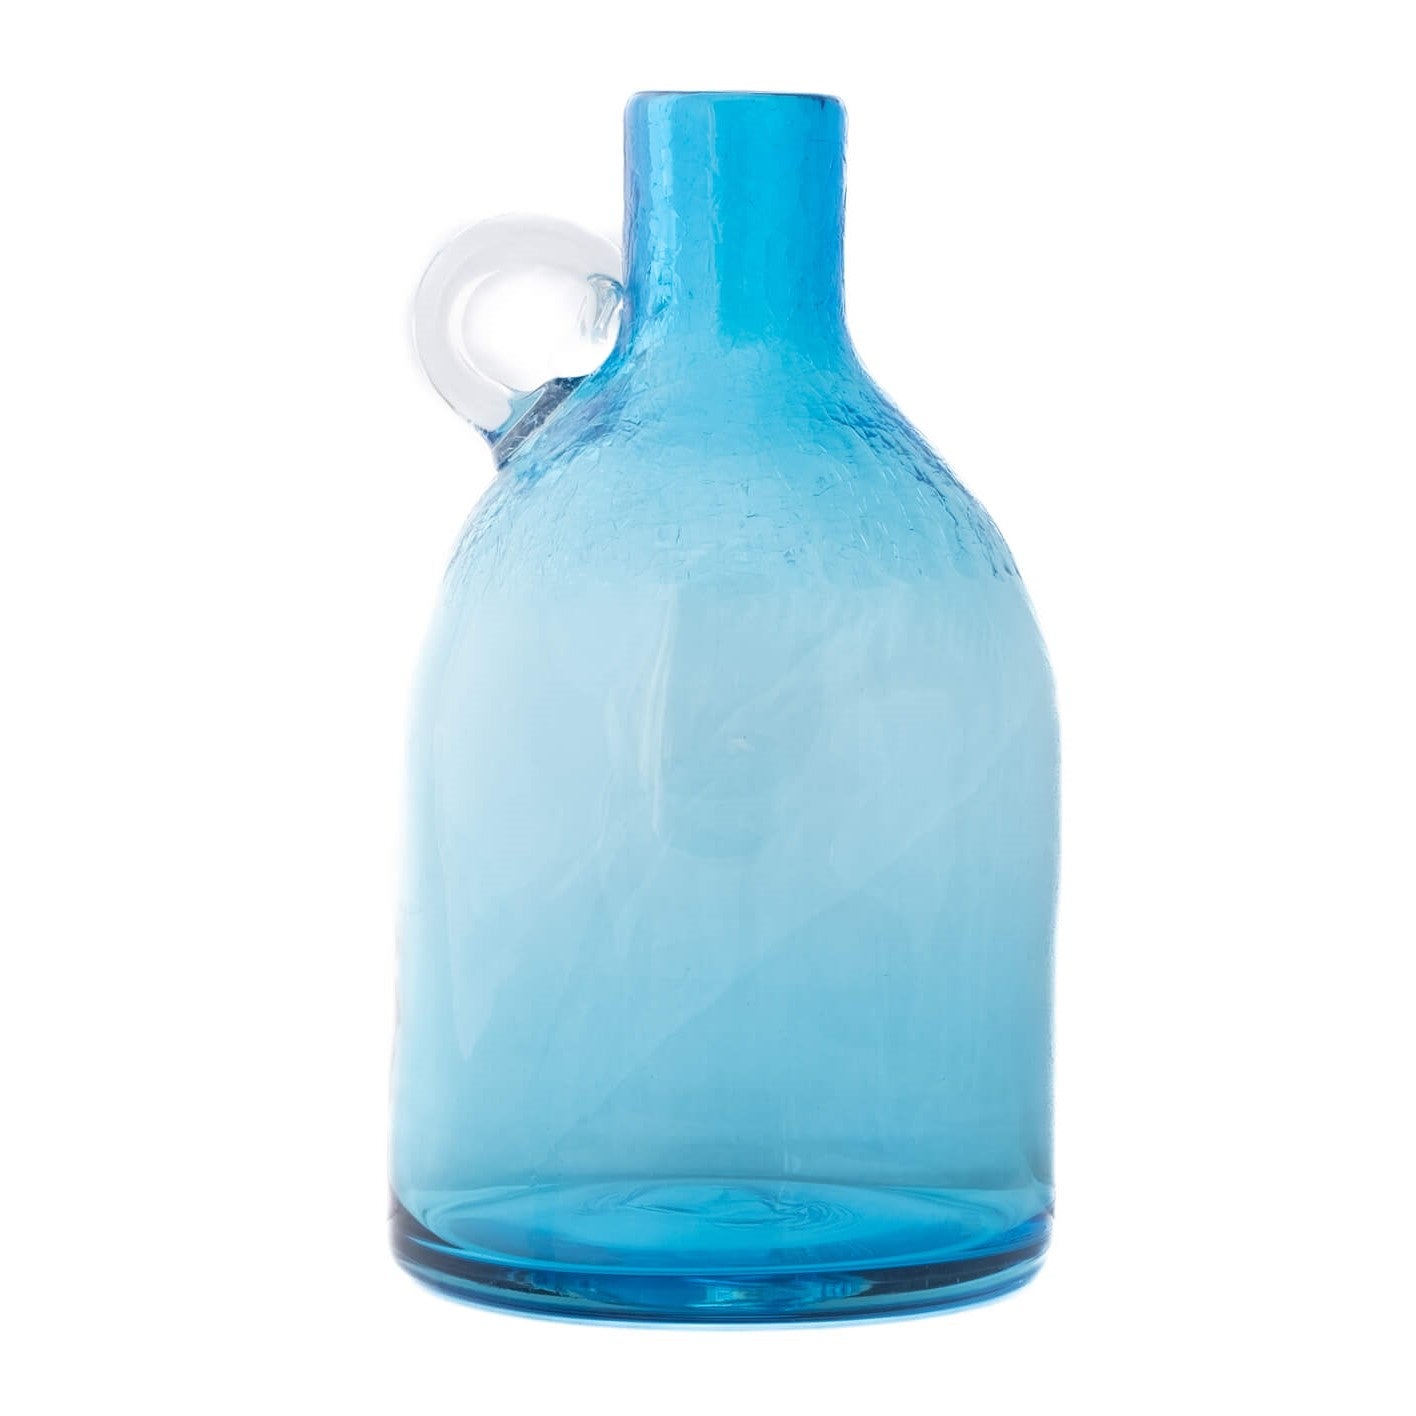 C Jorgensen for Bodum cooling juice jug with ice insert - blue and clear  plastic 1980s Bistro rare item